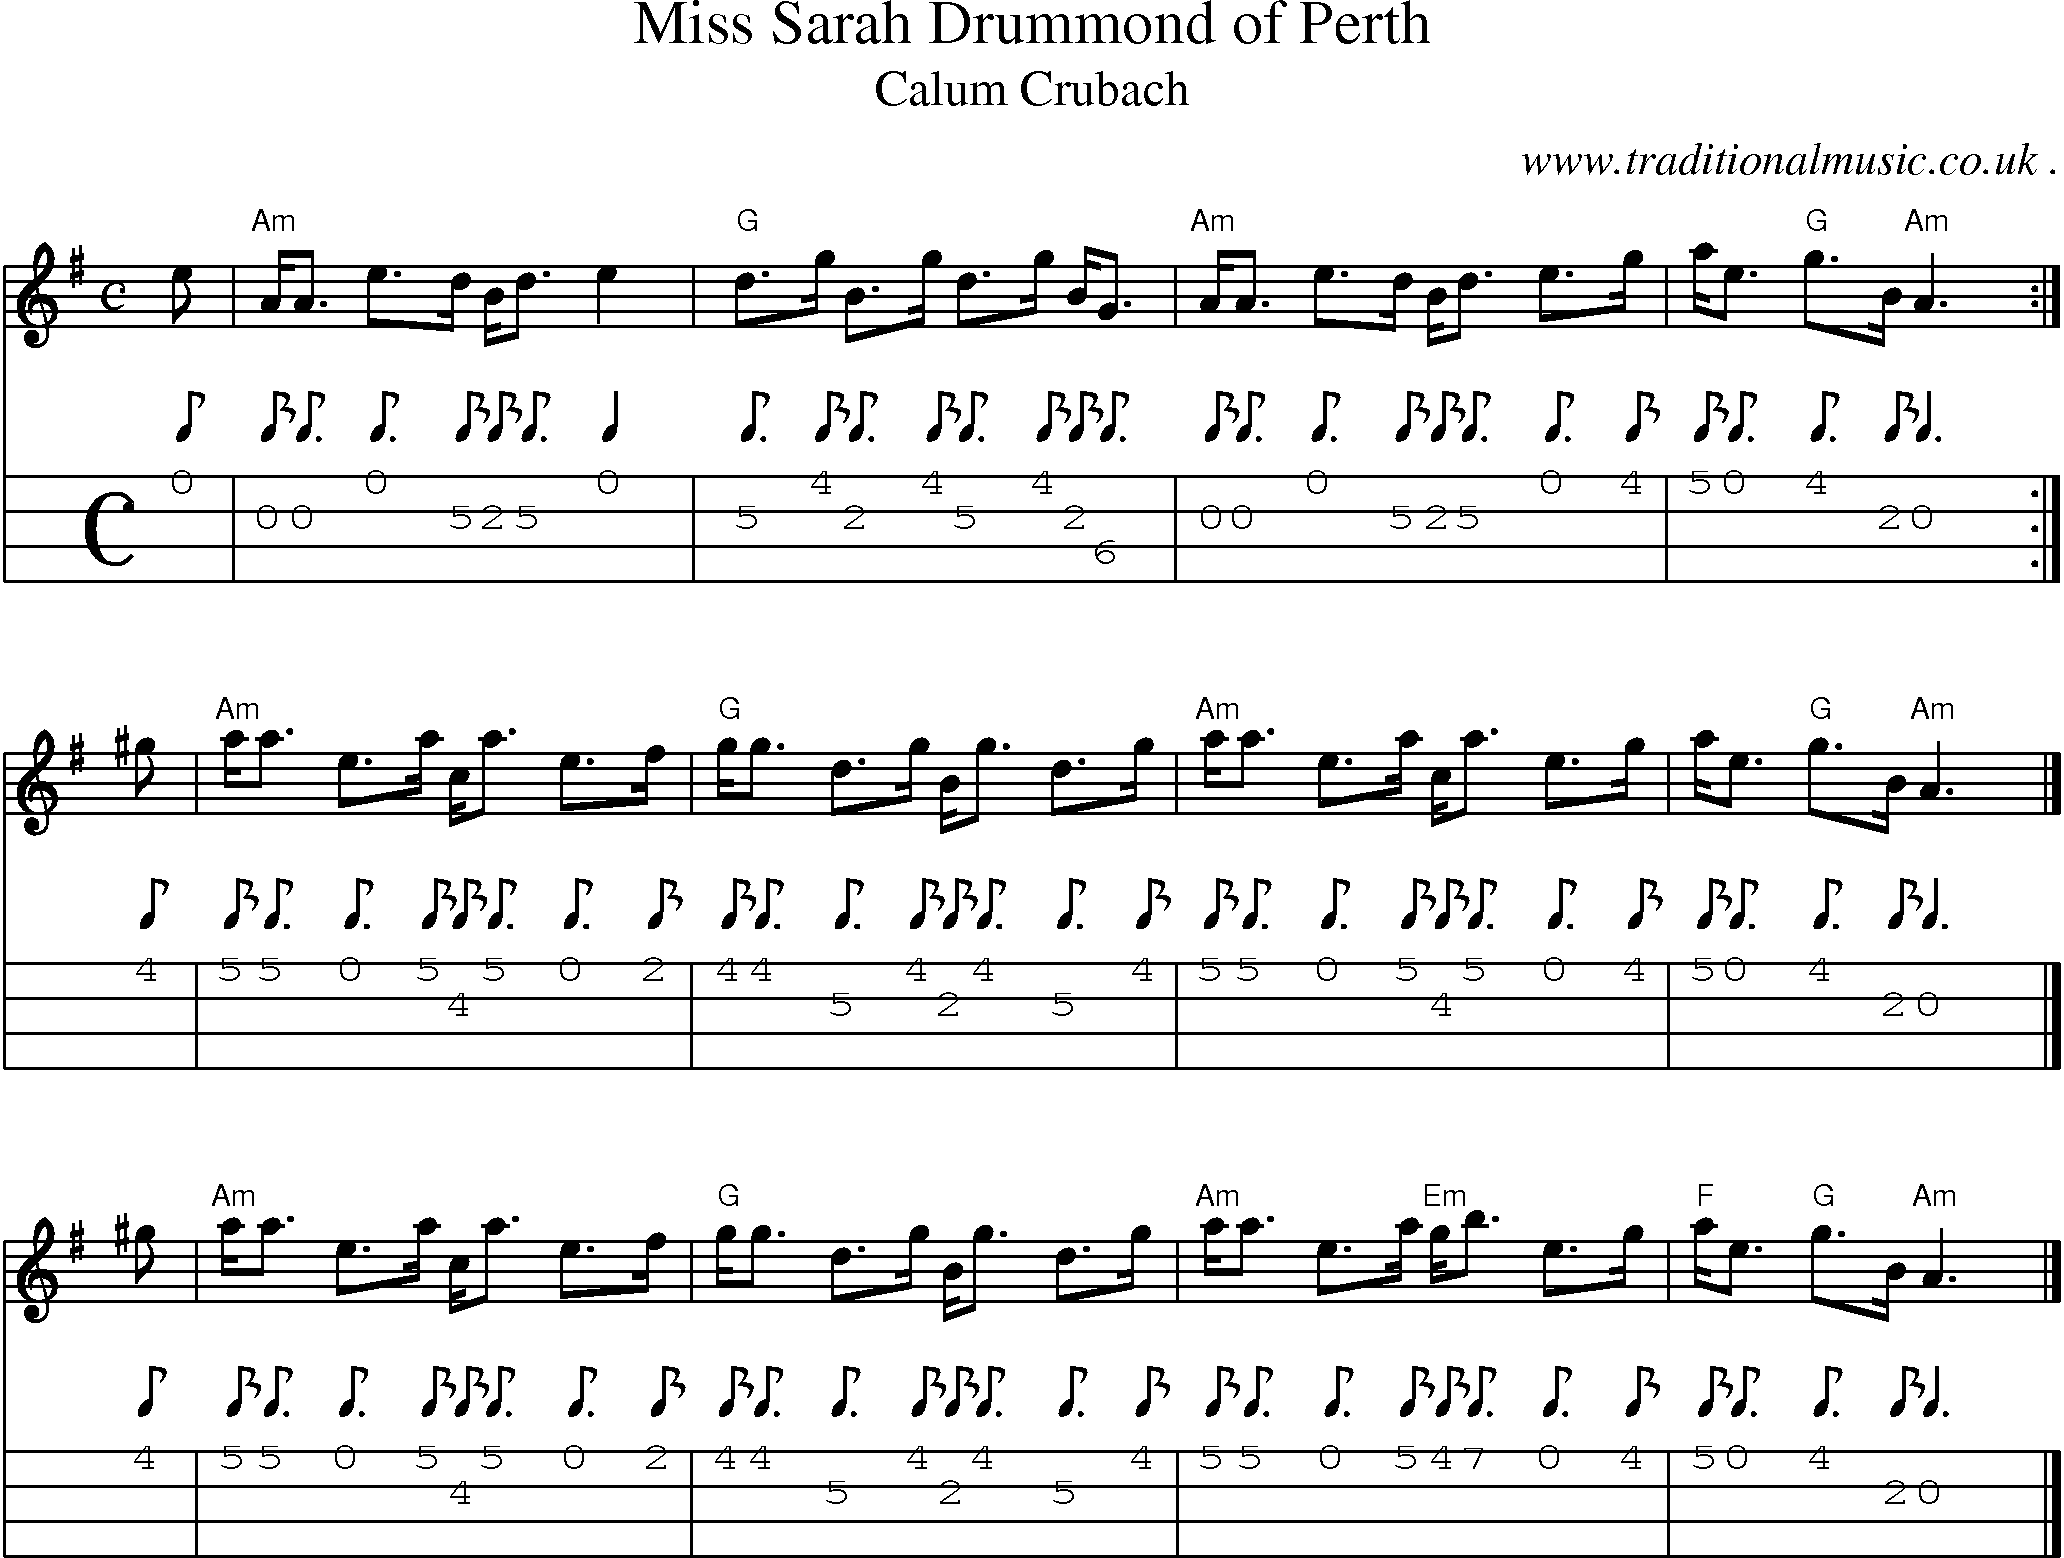 Sheet-music  score, Chords and Mandolin Tabs for Miss Sarah Drummond Of Perth